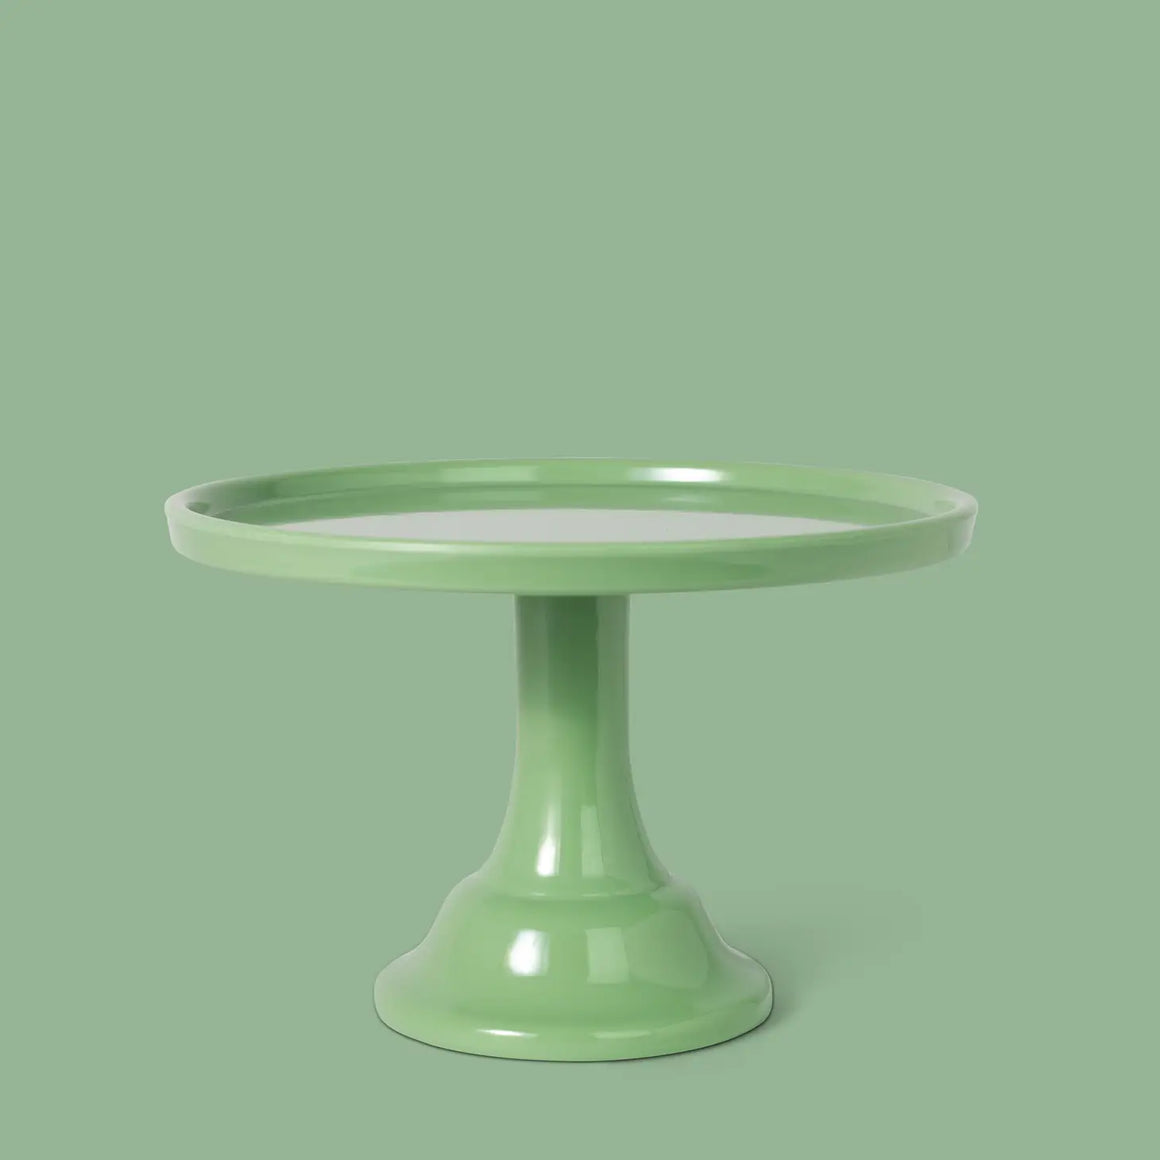 CAKE STAND - MELAMINE GREEN SAGE SMALL